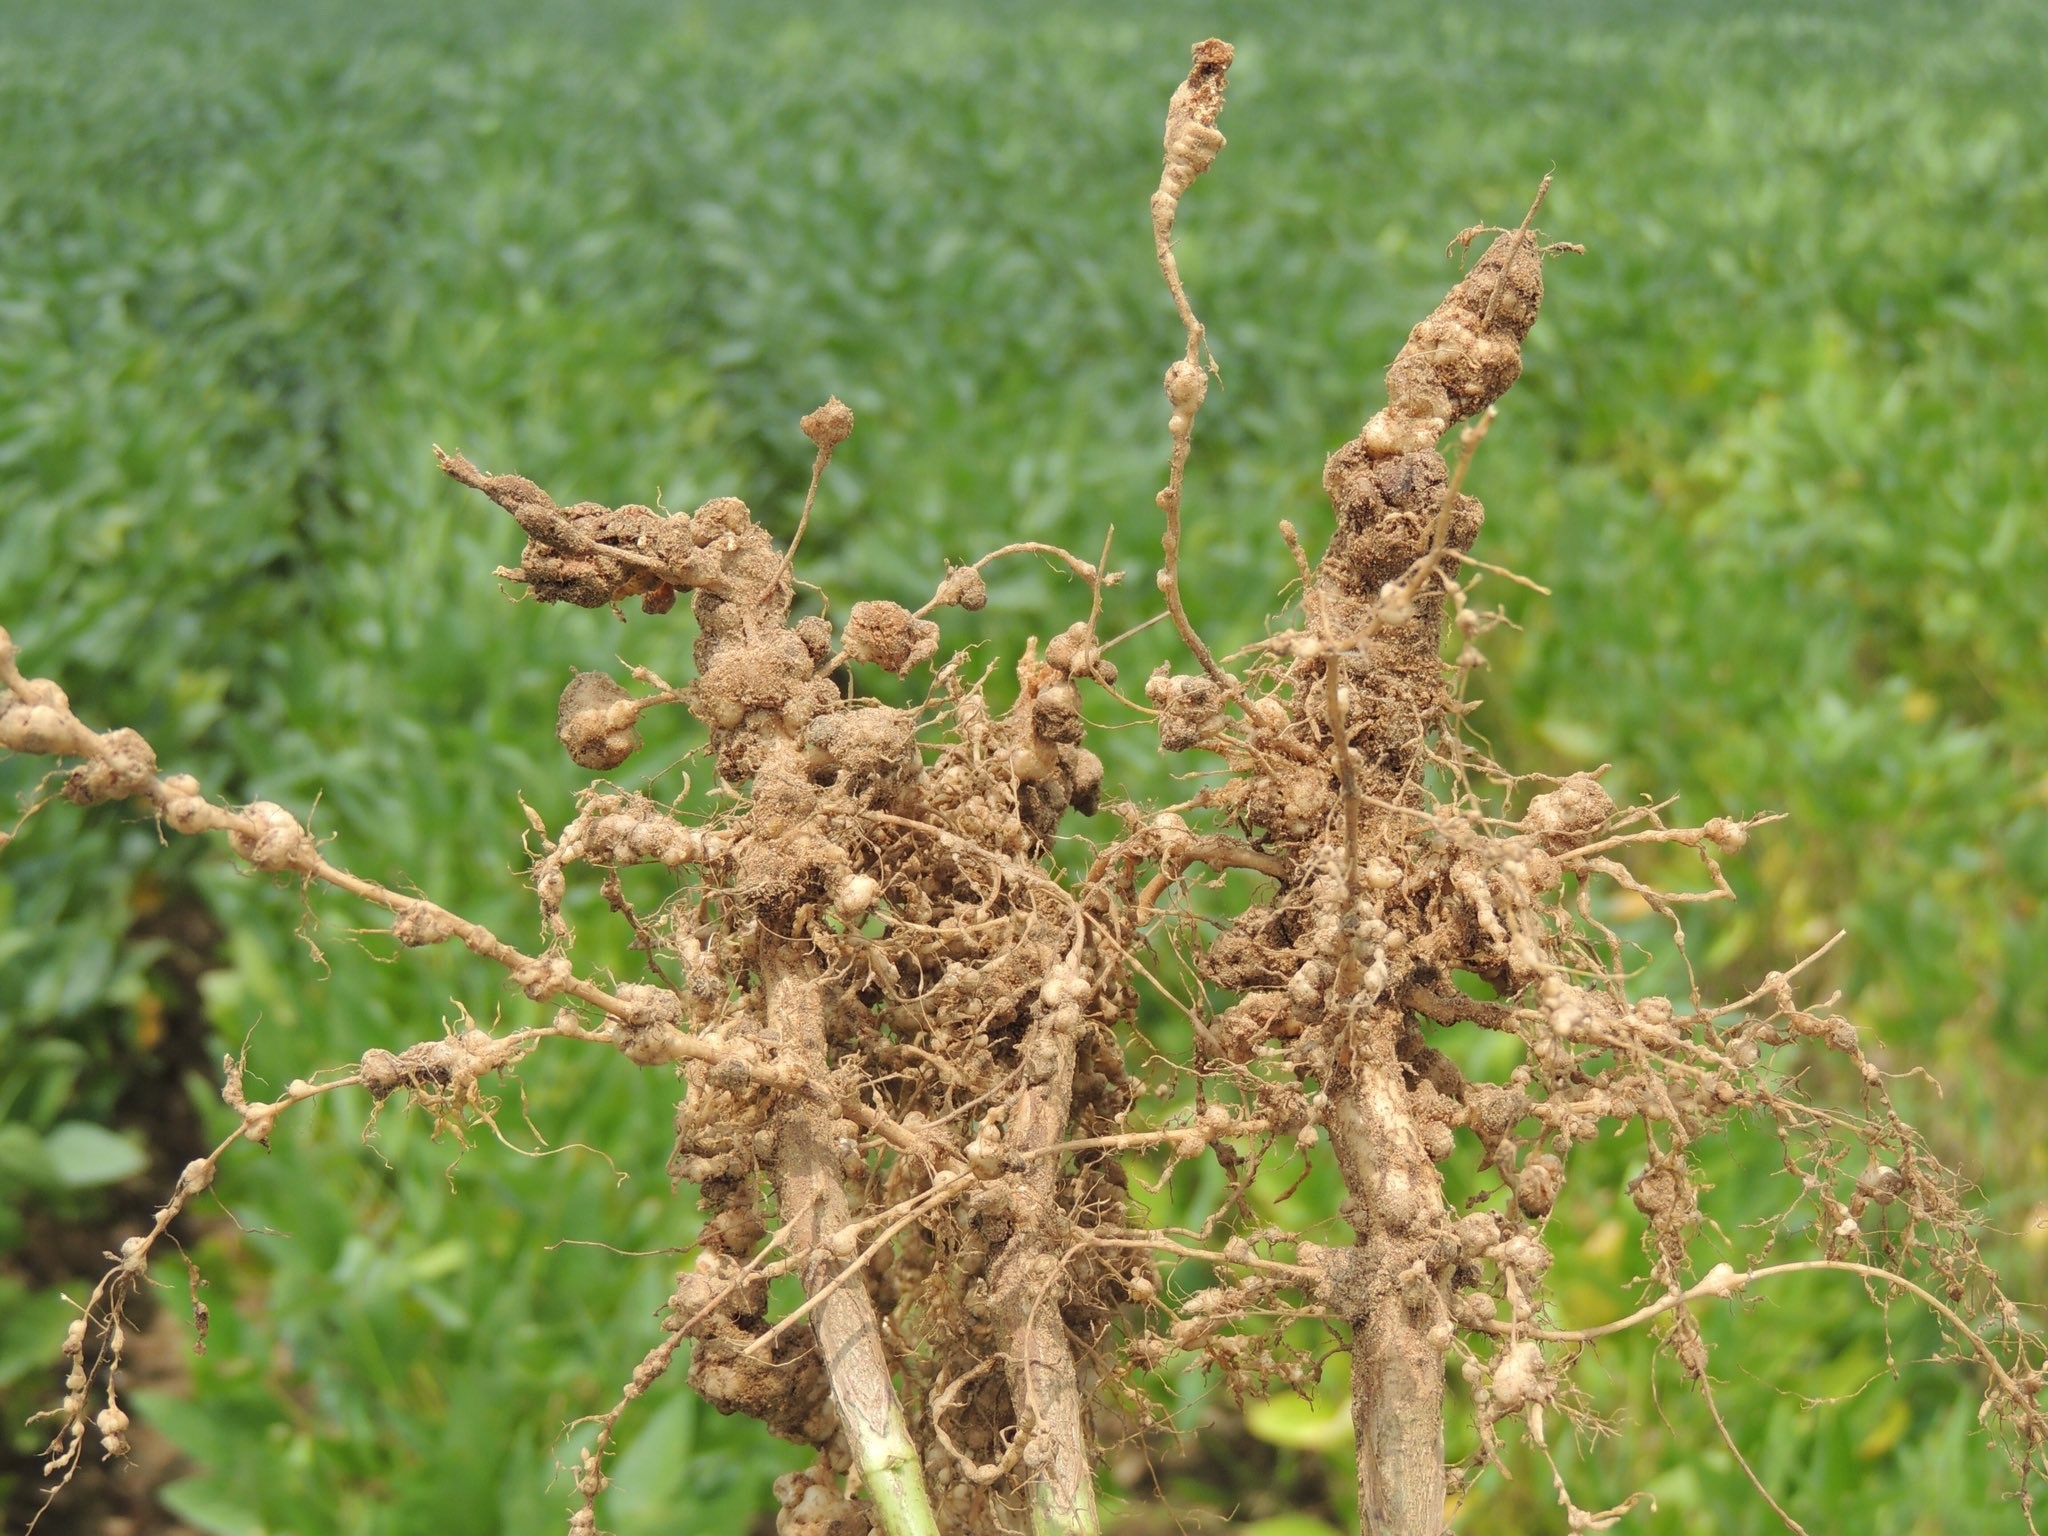 Knot Root Nematode Damage in Soybeans